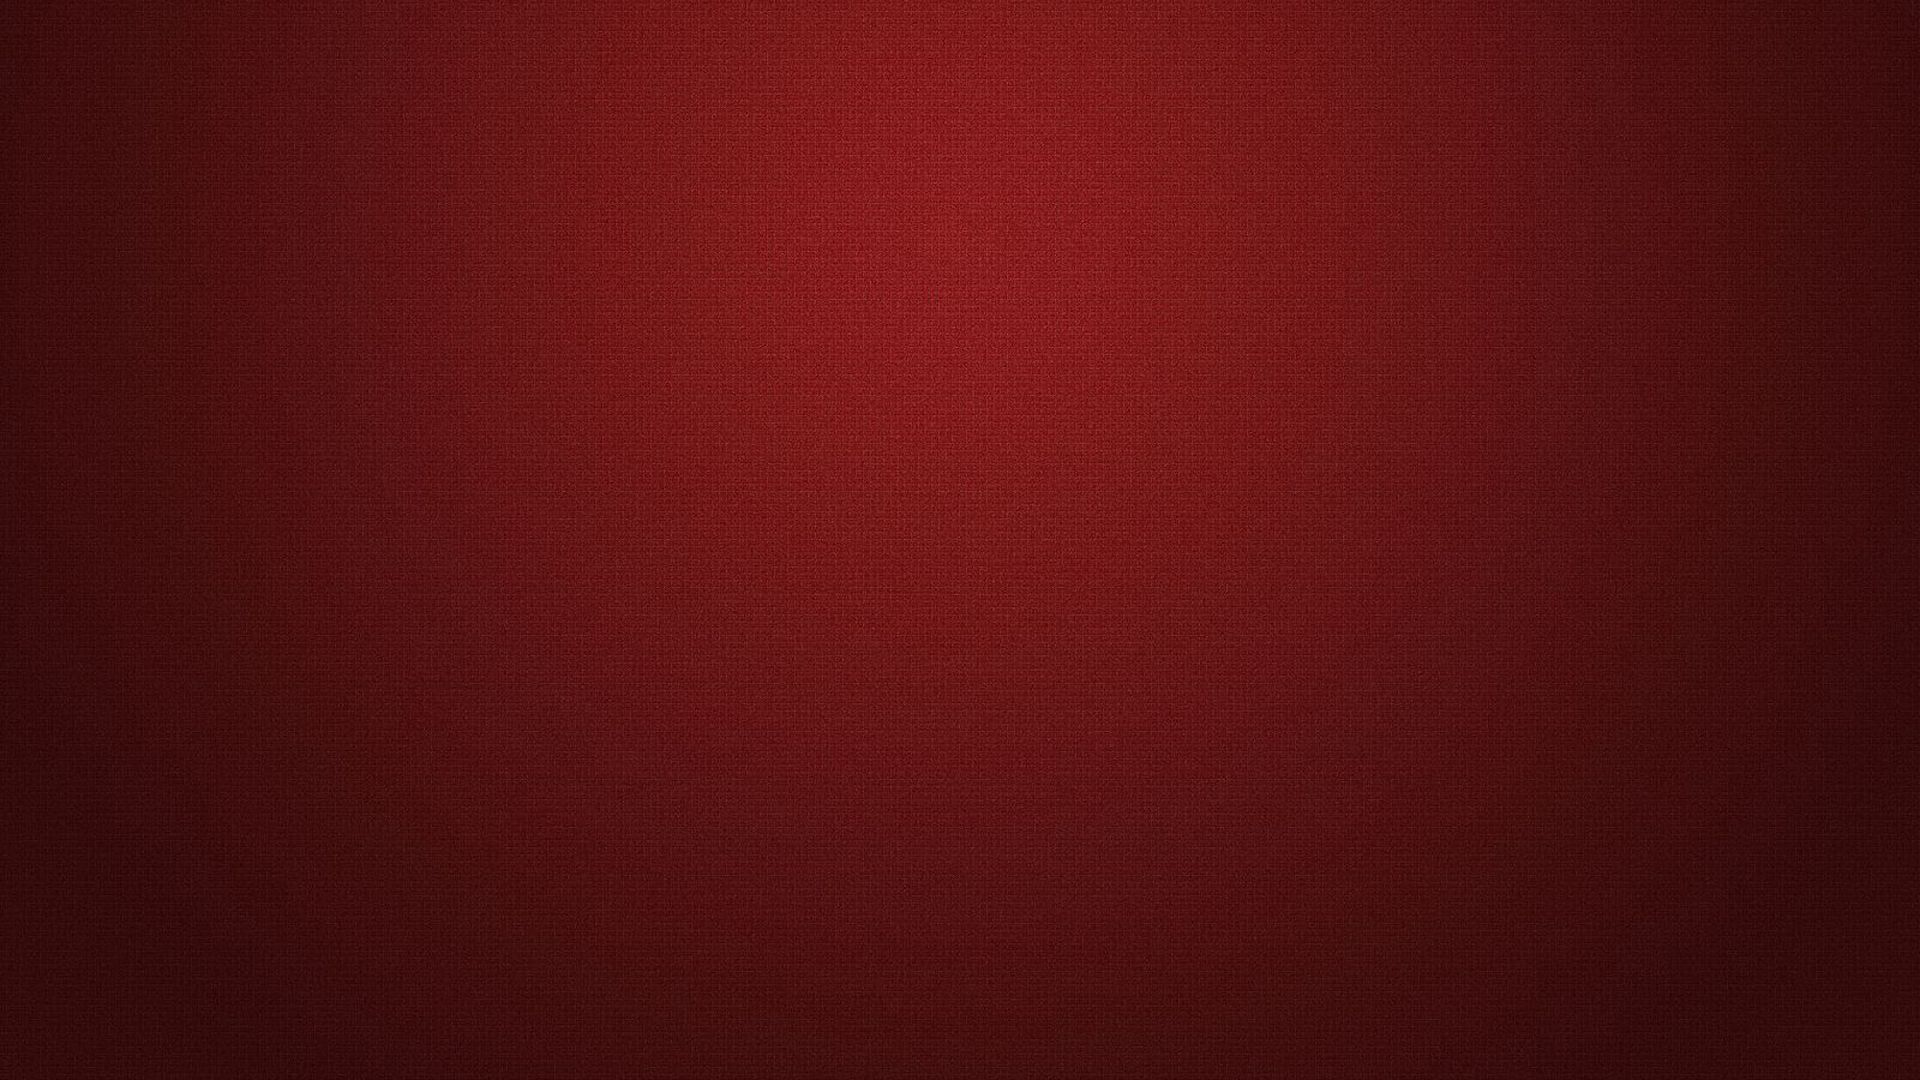 Red background with a red to black gradient - Red